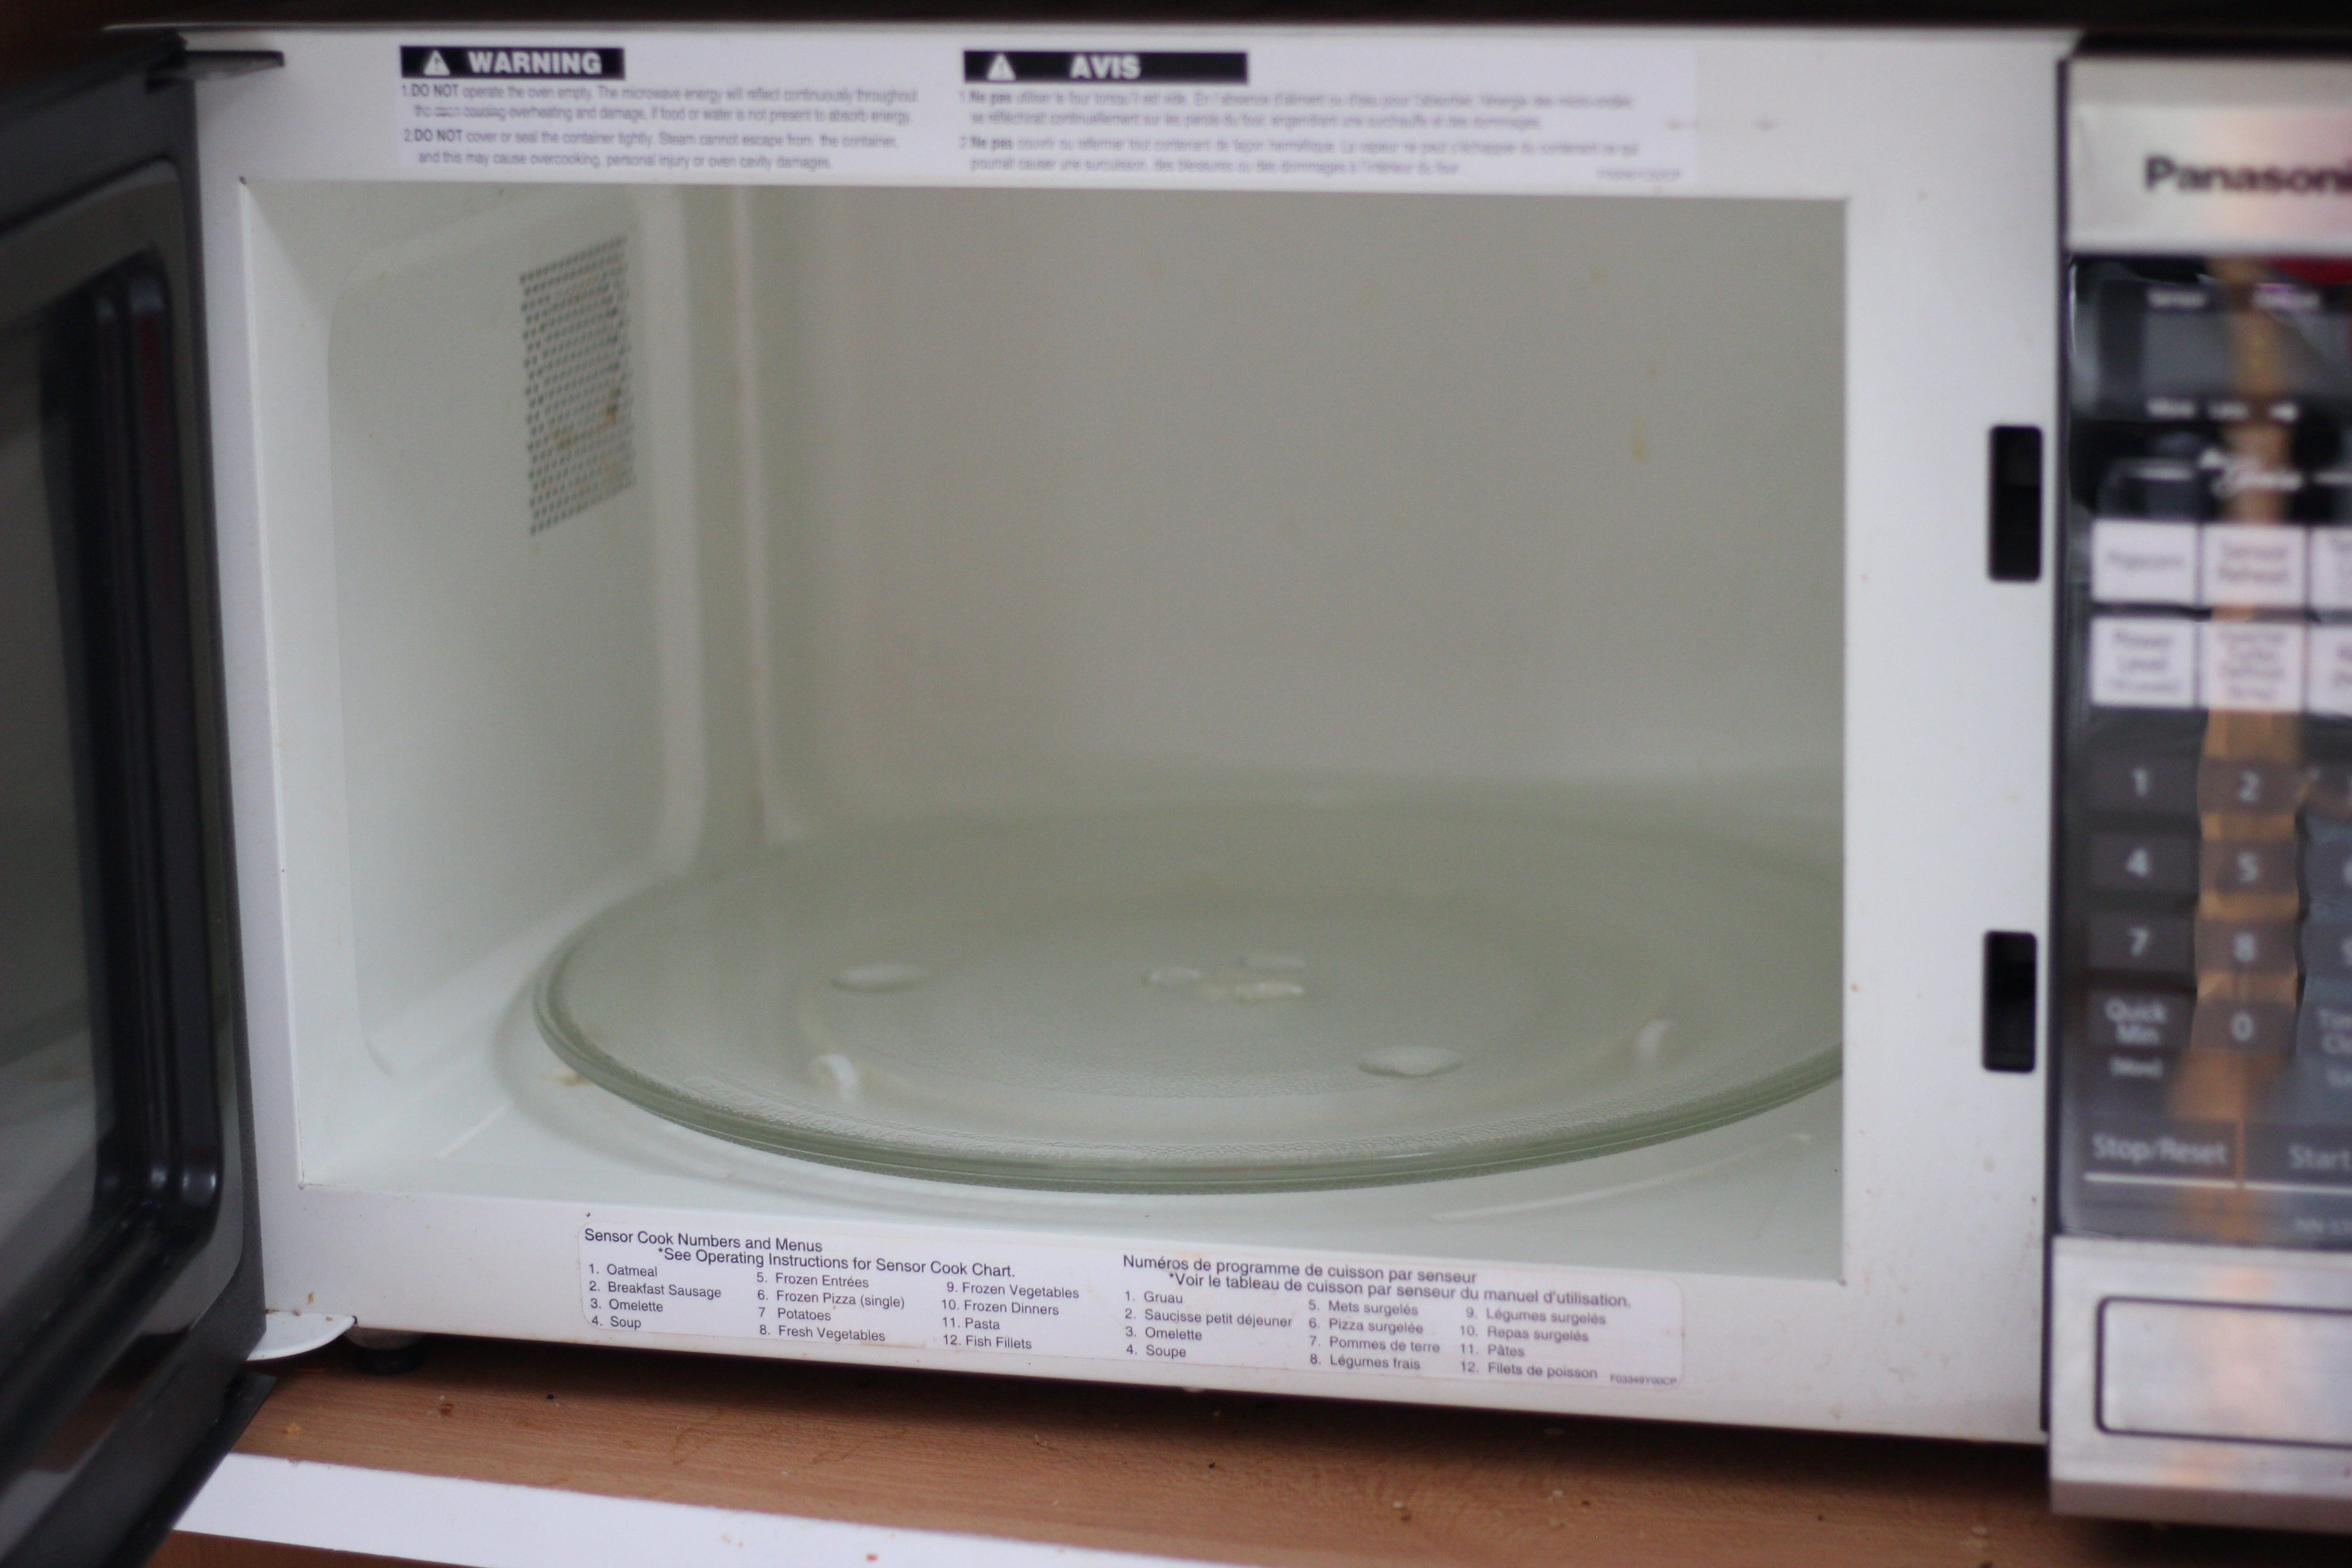 All natural microwave cleaning hack to deep clean the inside of your microwave.